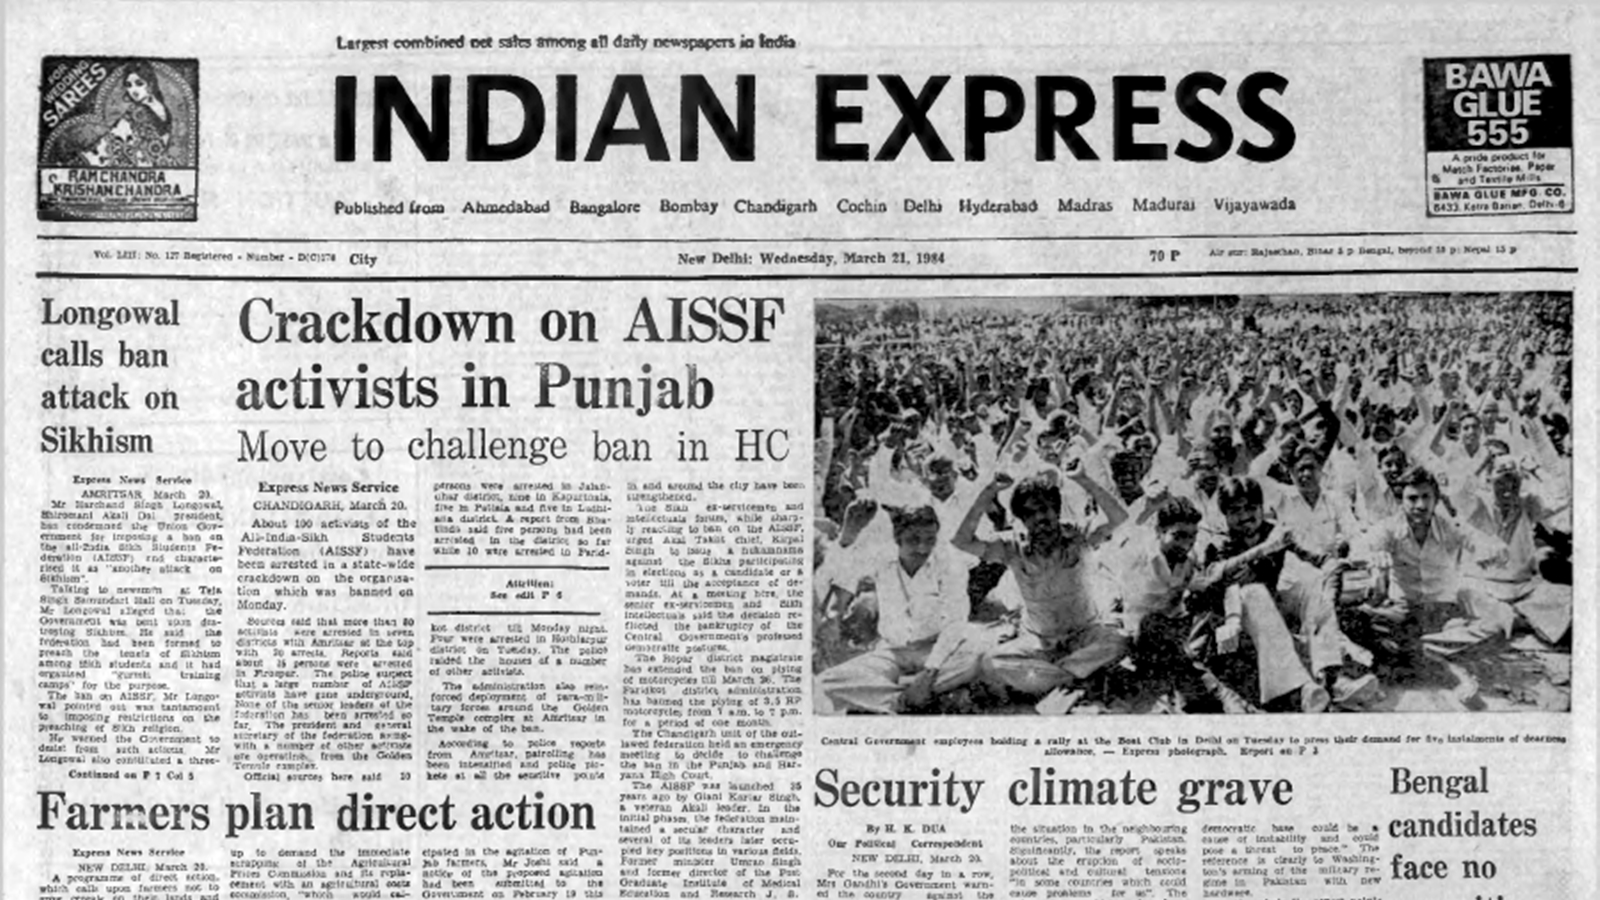 This is the front page of The Indian Express published on March 21, 1984.